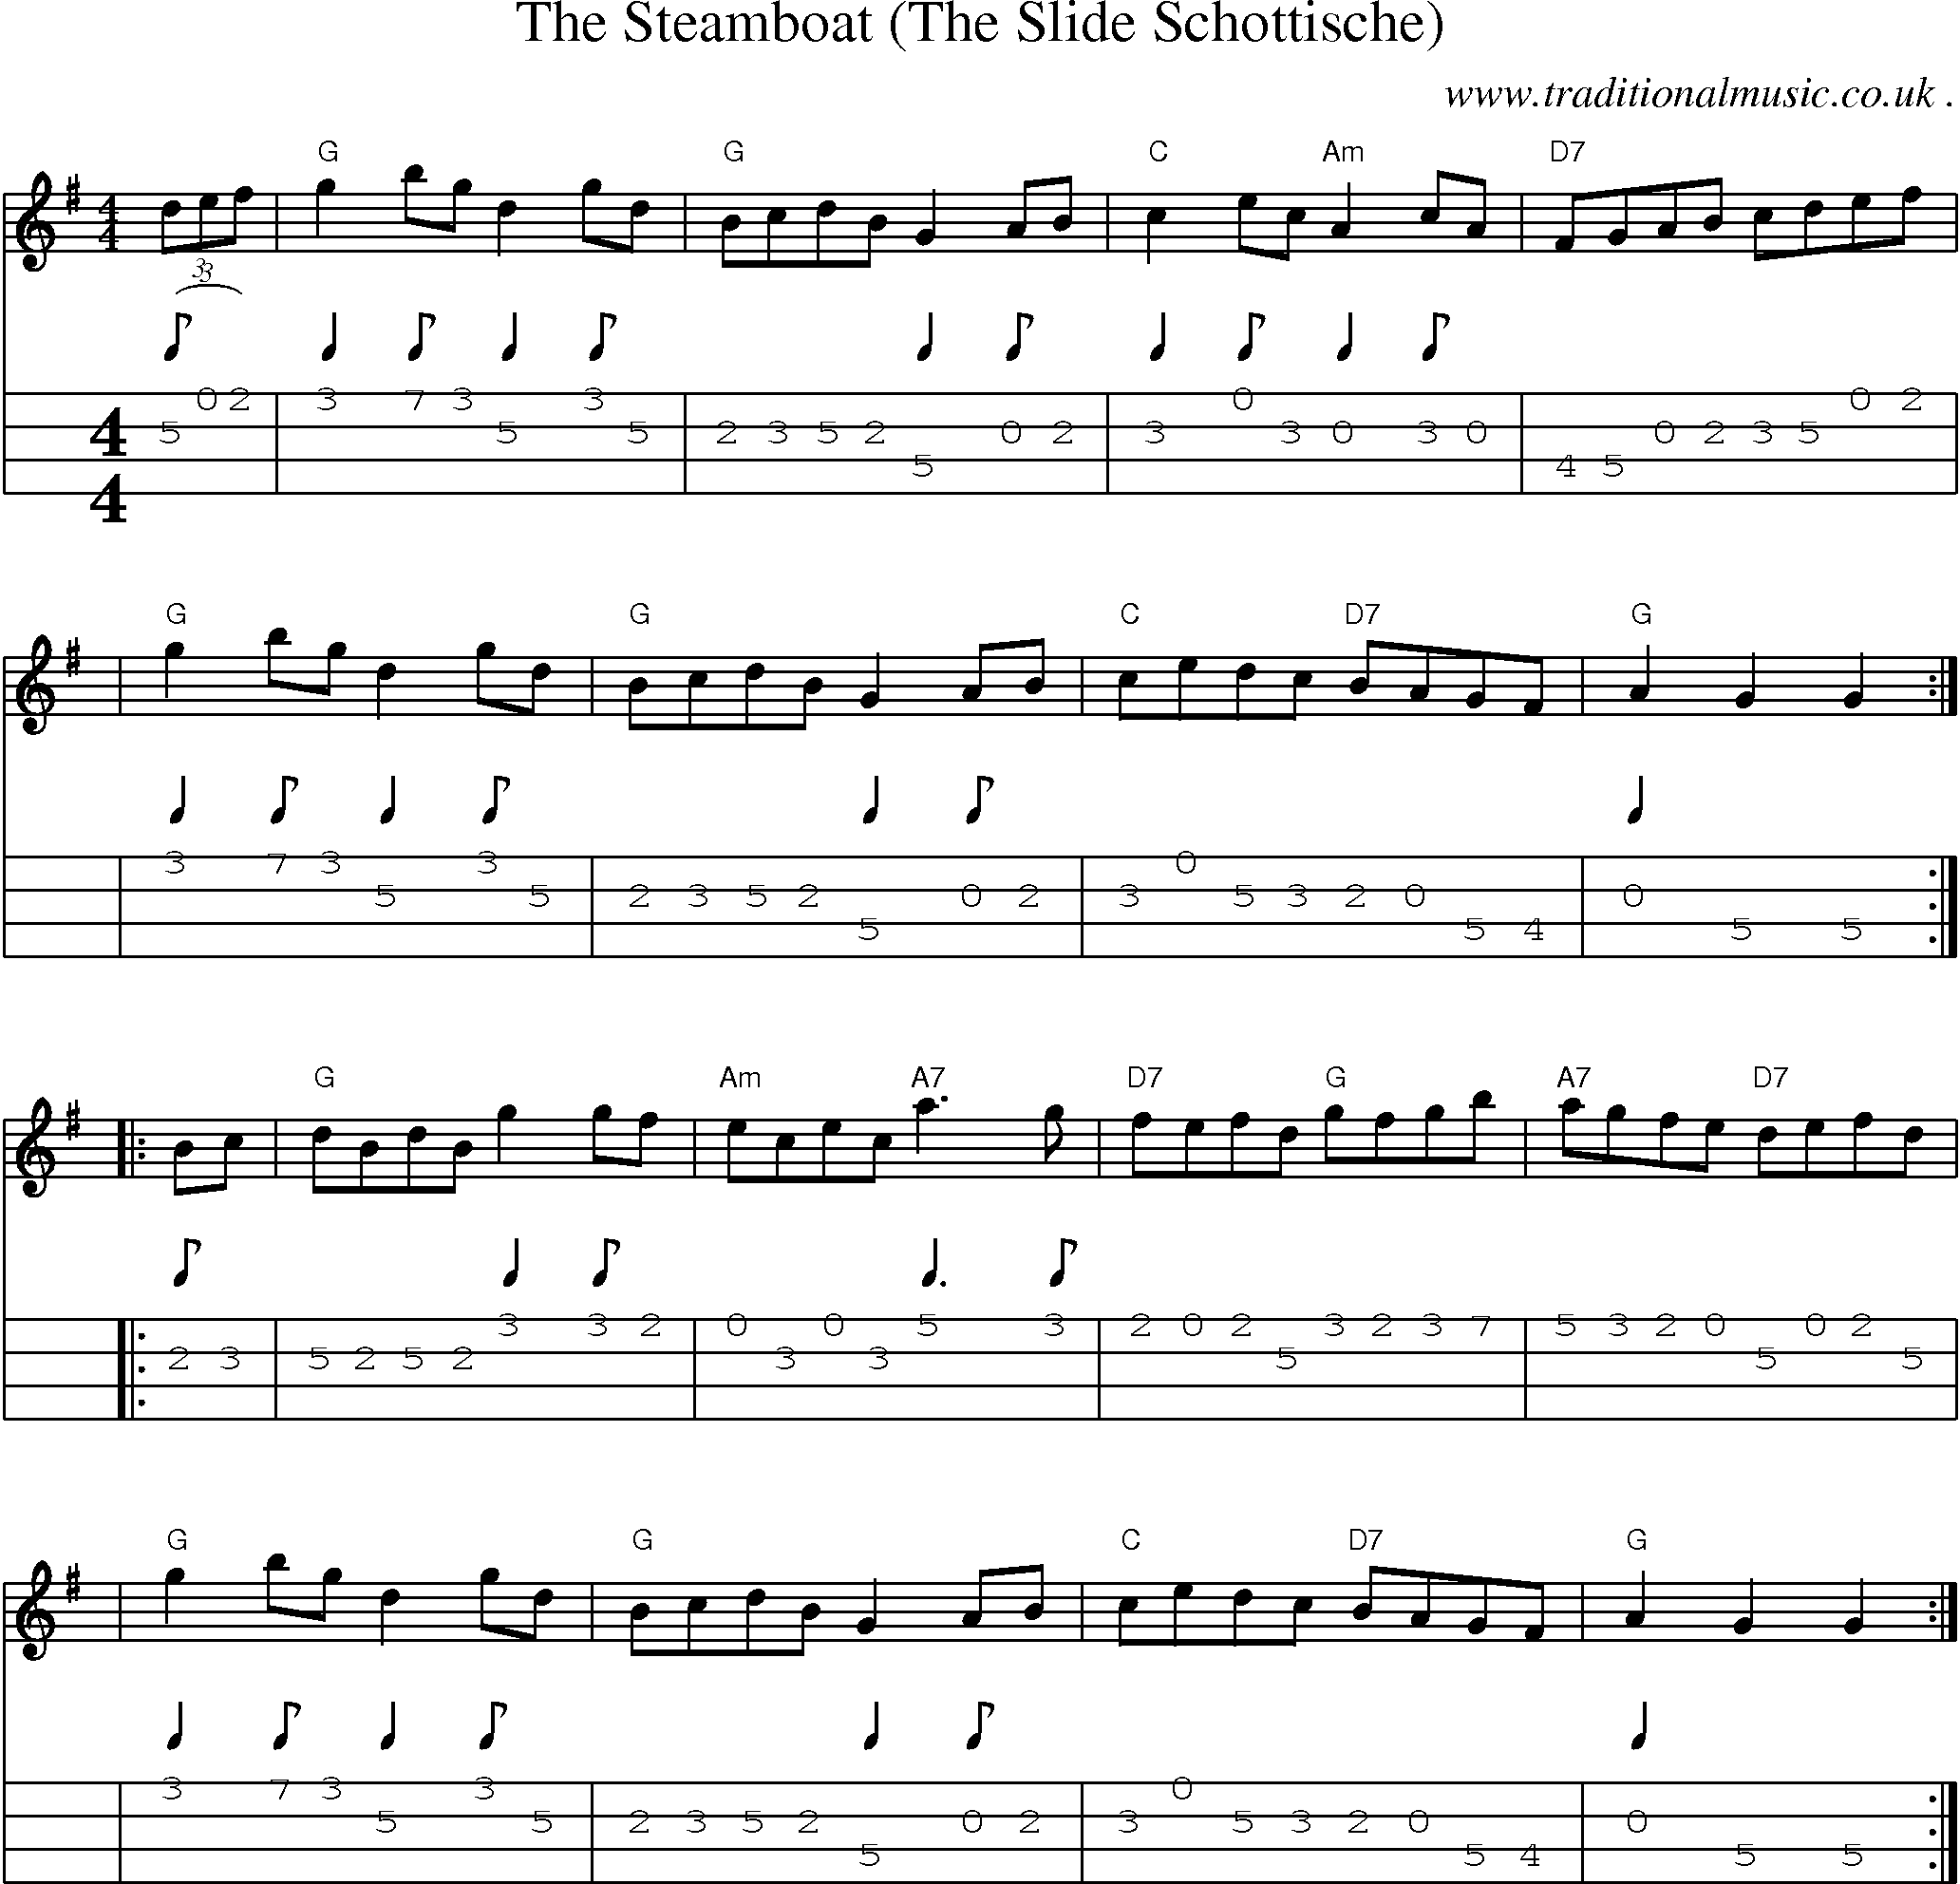 Sheet-music  score, Chords and Mandolin Tabs for The Steamboat The Slide Schottische